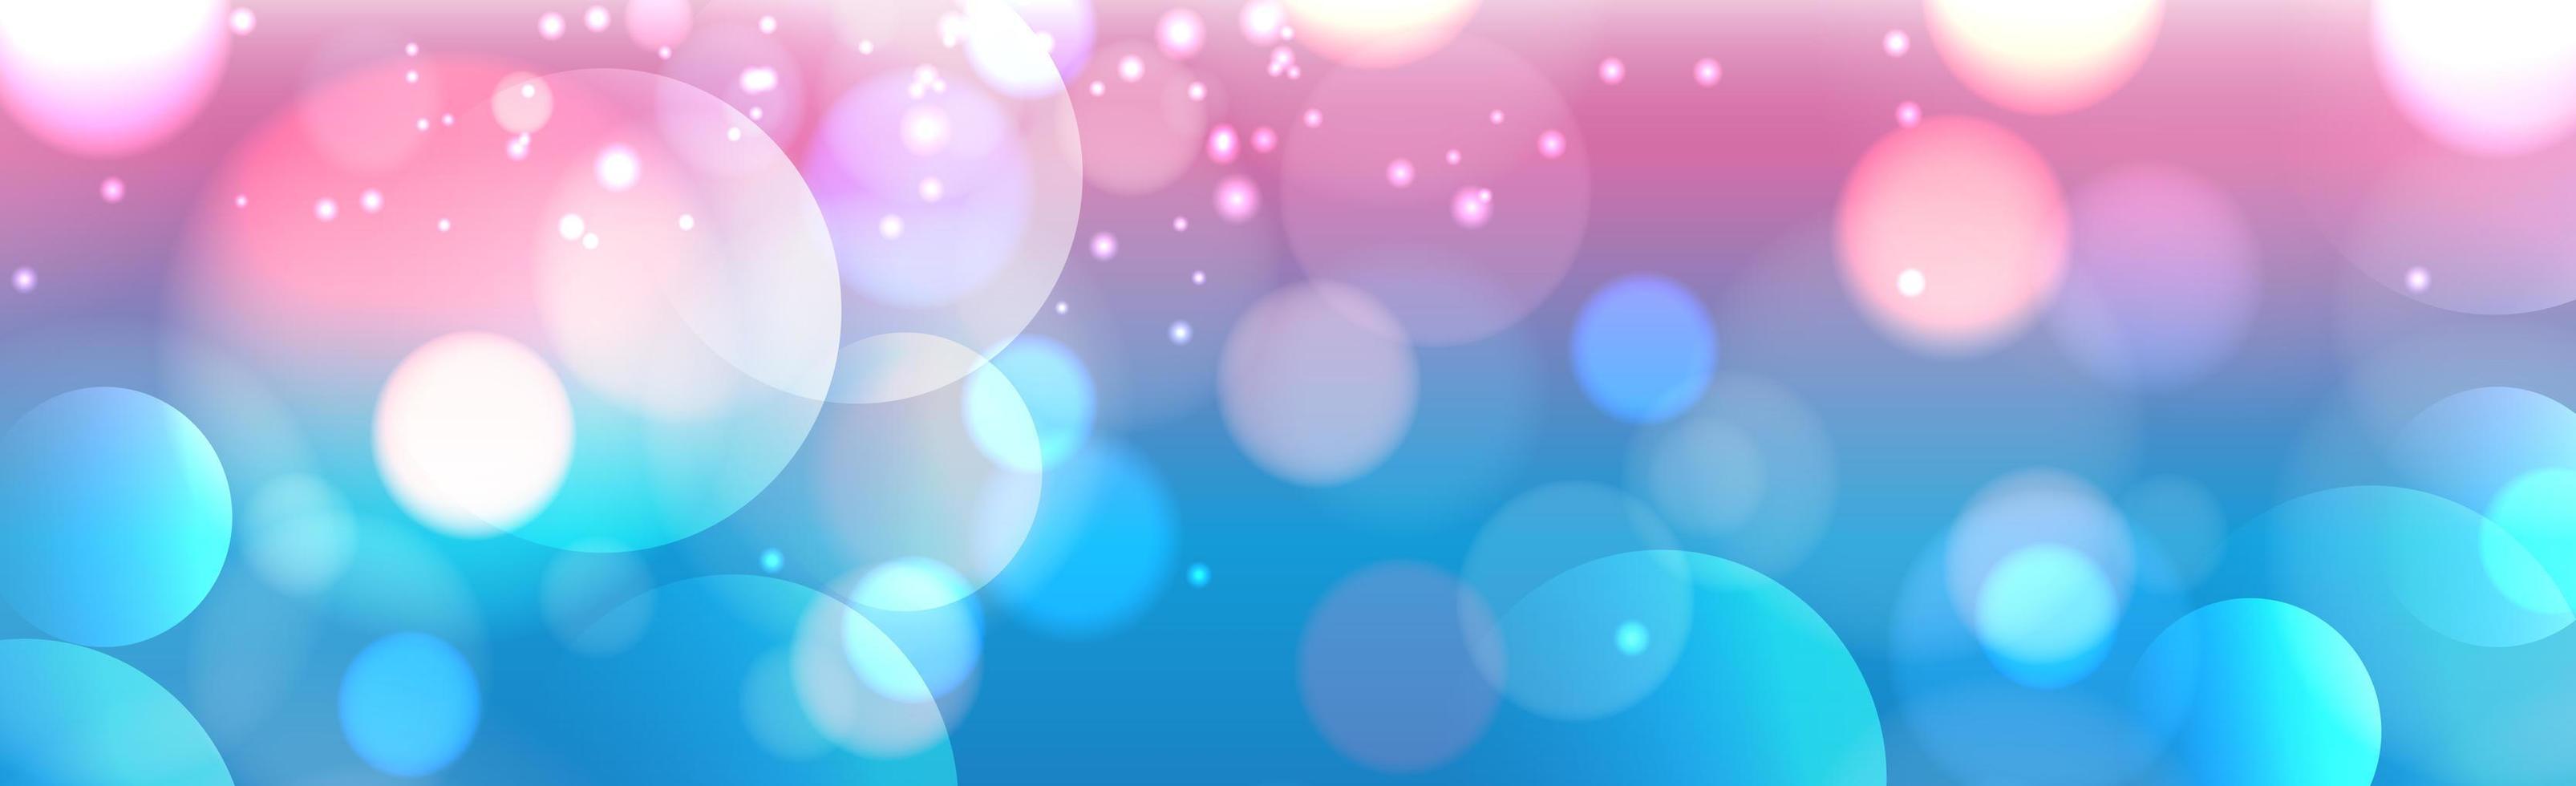 Abstract blue bokeh background with defocused circles and glitter. Decoration element for Christmas and New Year holidays, greeting cards, web banners, posters - Vector